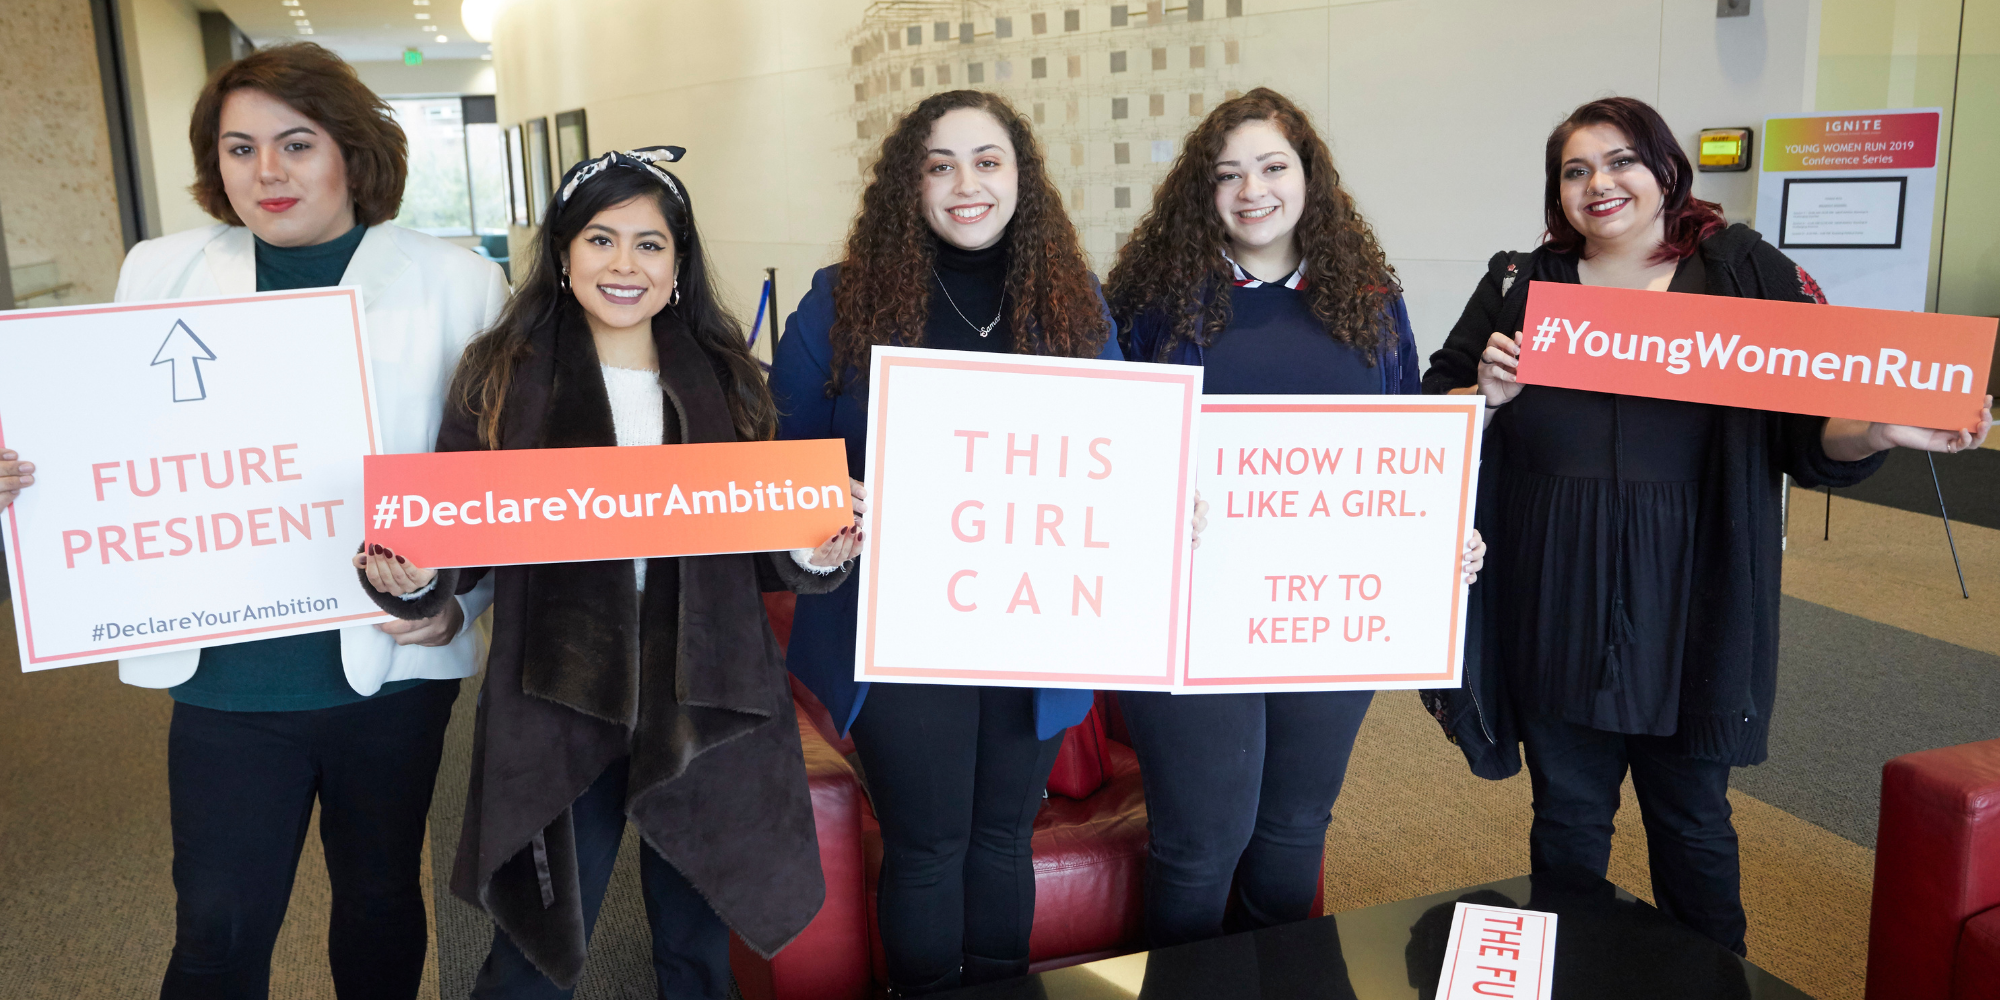 Closing the ambition gap by training young women to run for office